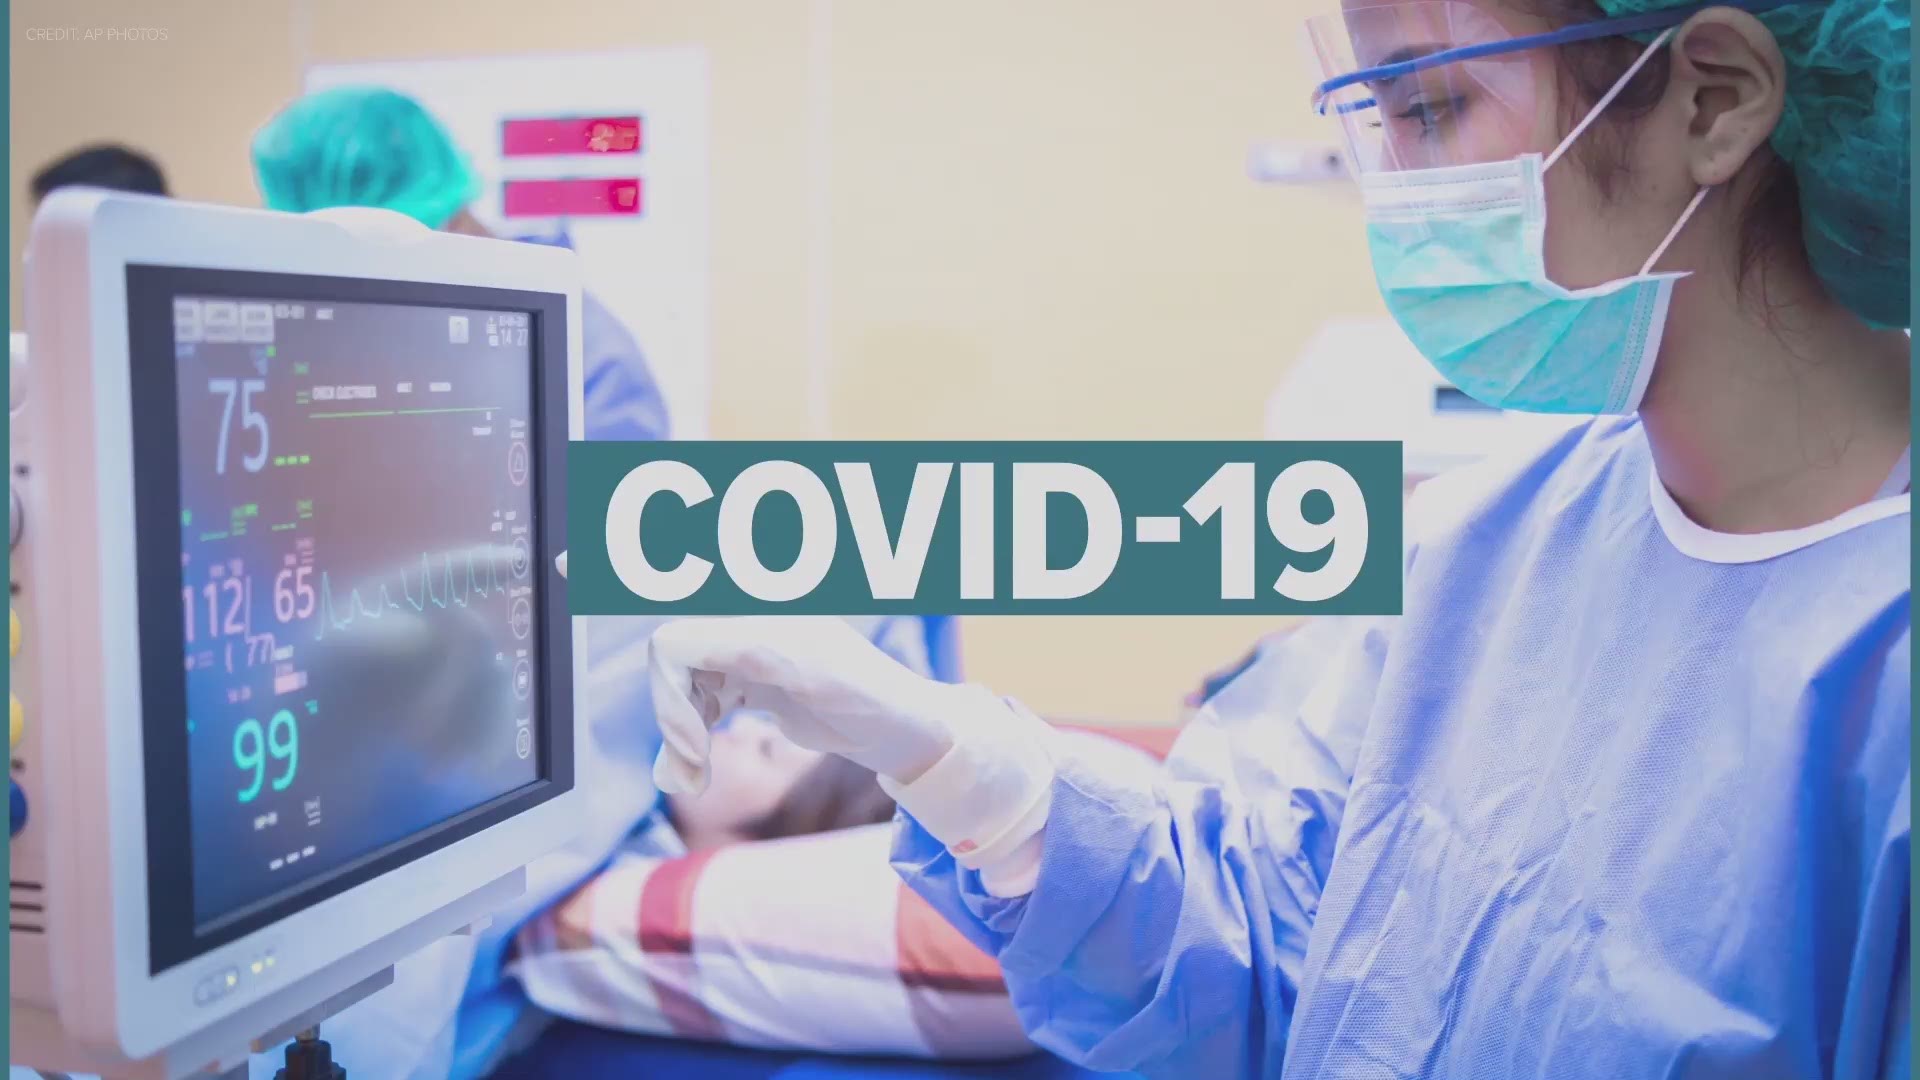 The number of coronavirus cases in Arizona has reached 13,169 as of Friday, with 651 coronavirus-related deaths. Here's the latest COVID-19 update.